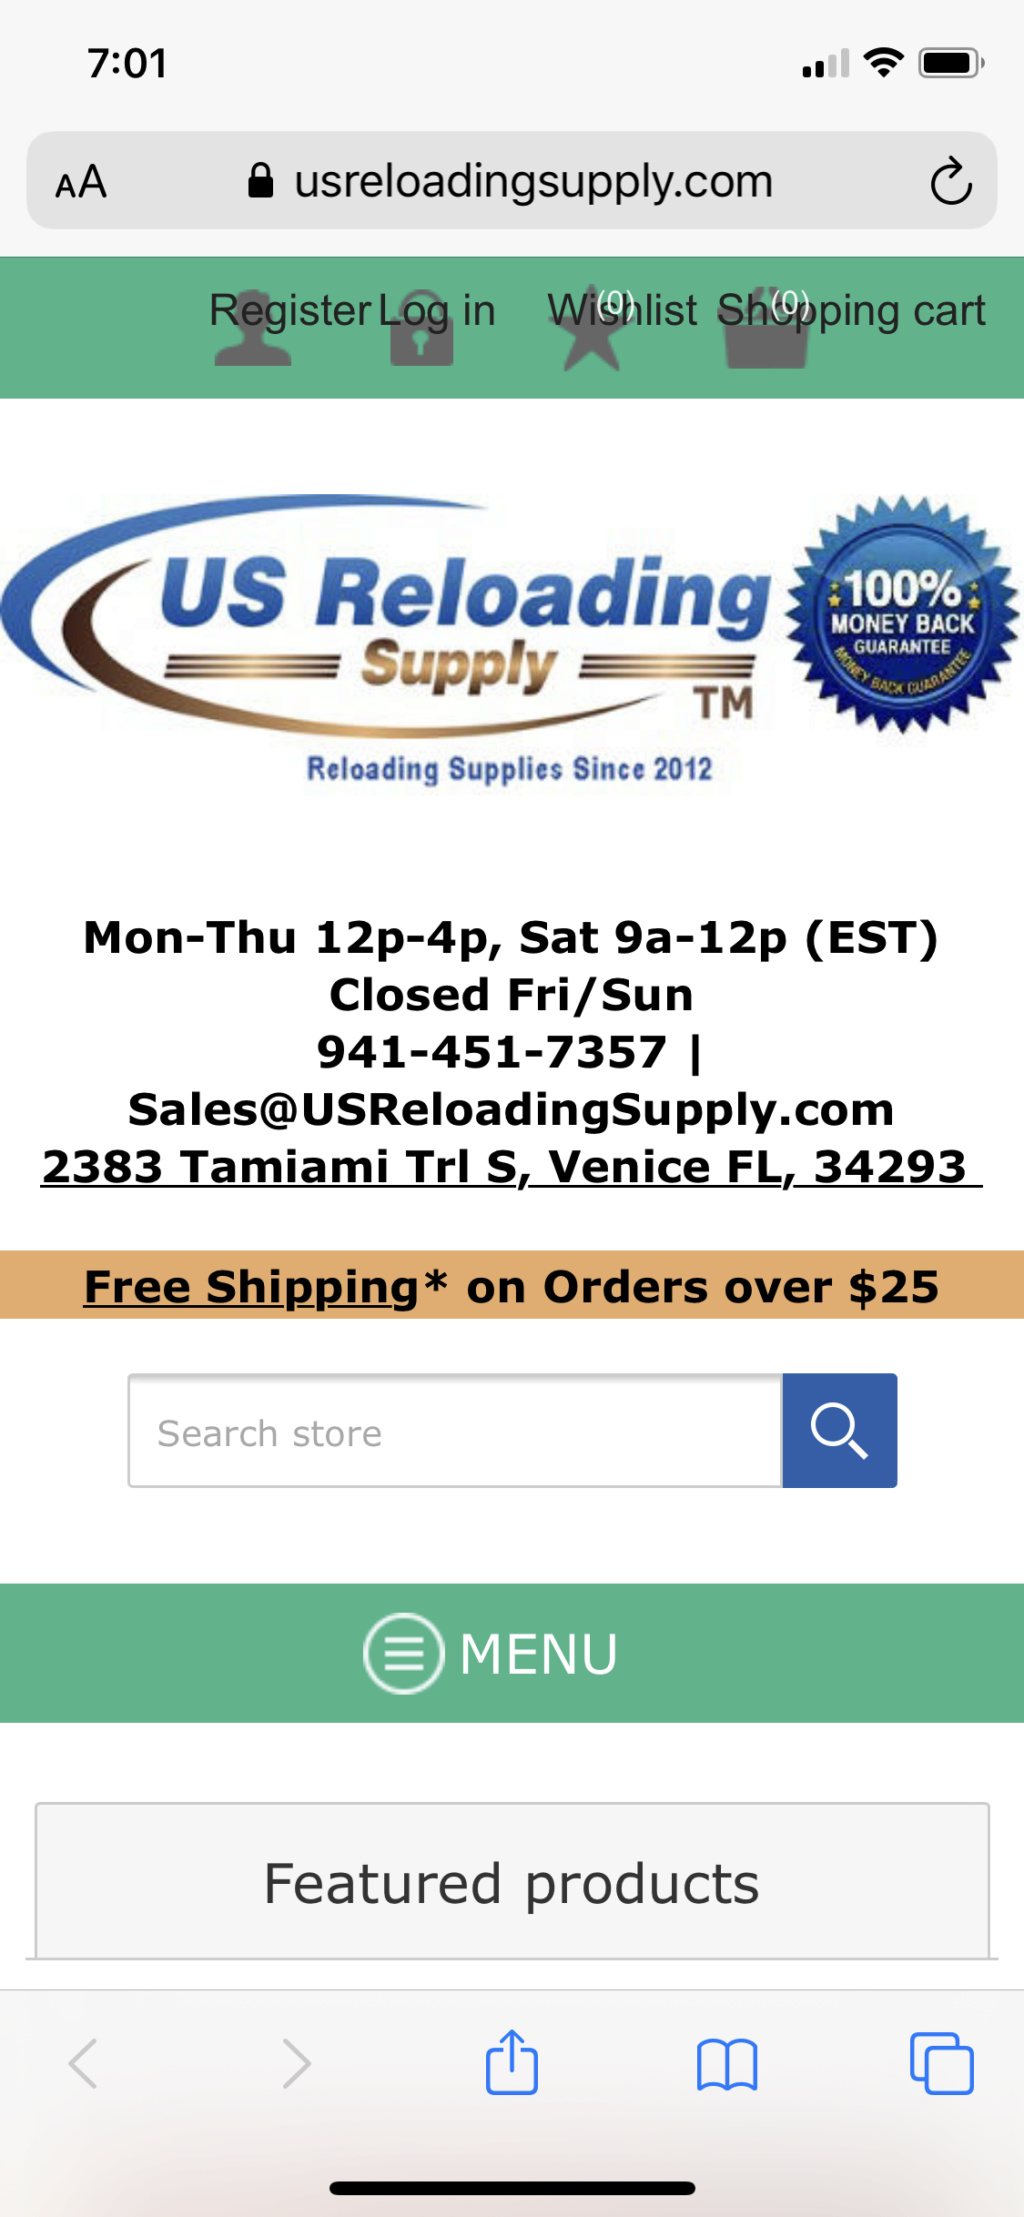 Another Reloading Supplier to check out D58c2410